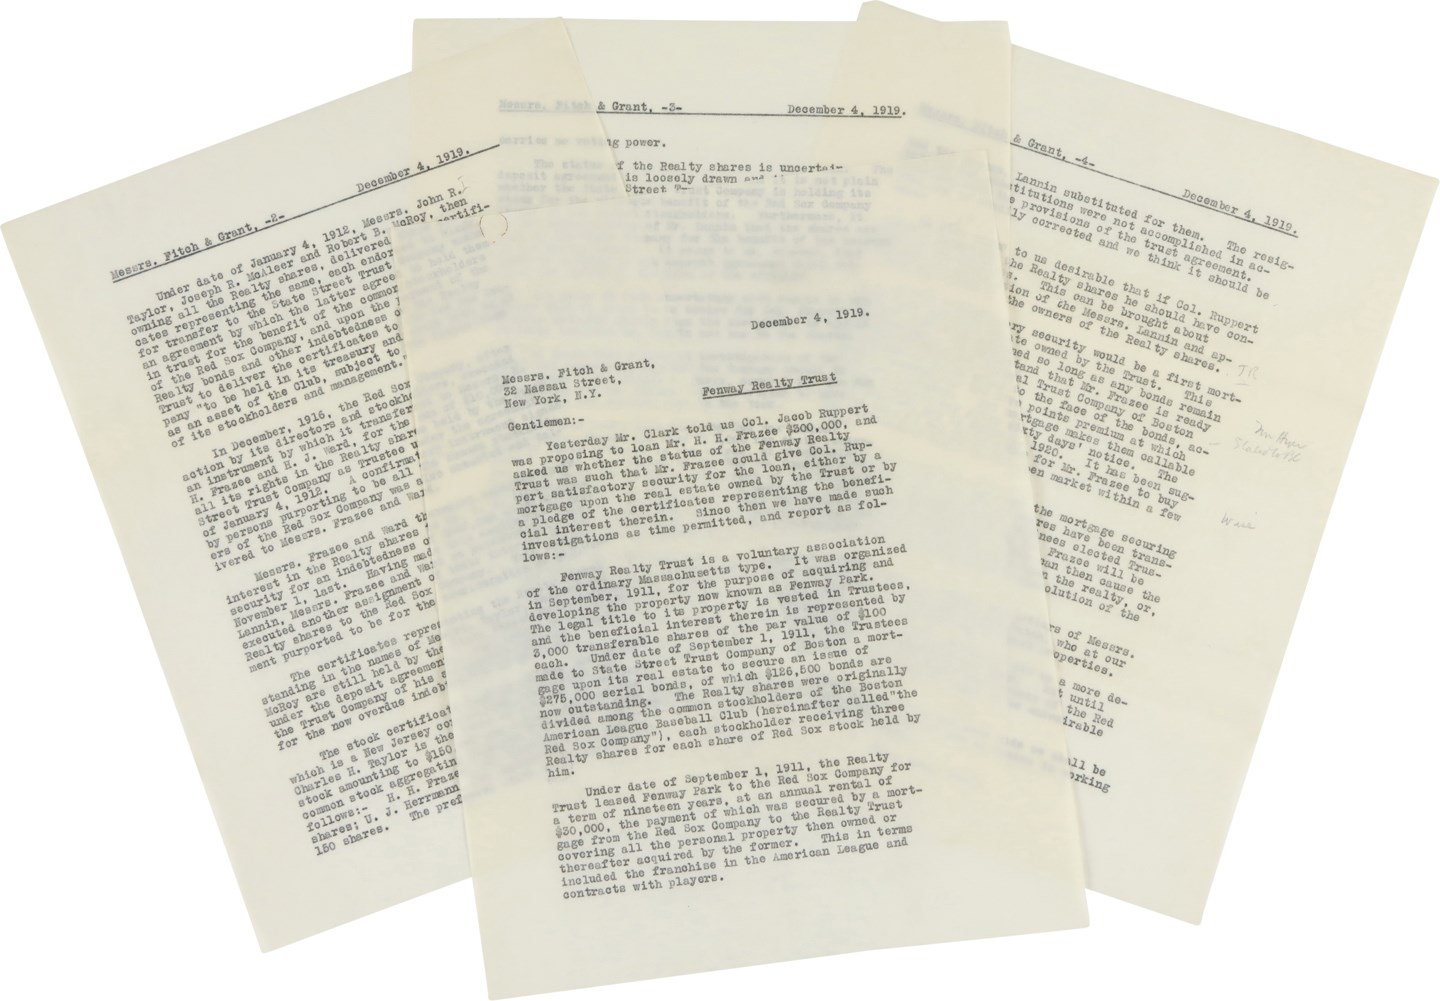 - 1919 NY Yankees $300,000 Loan Analysis Copy Letter for the Sale of Babe Ruth’s Contract (ex-Barry Halper Collection)